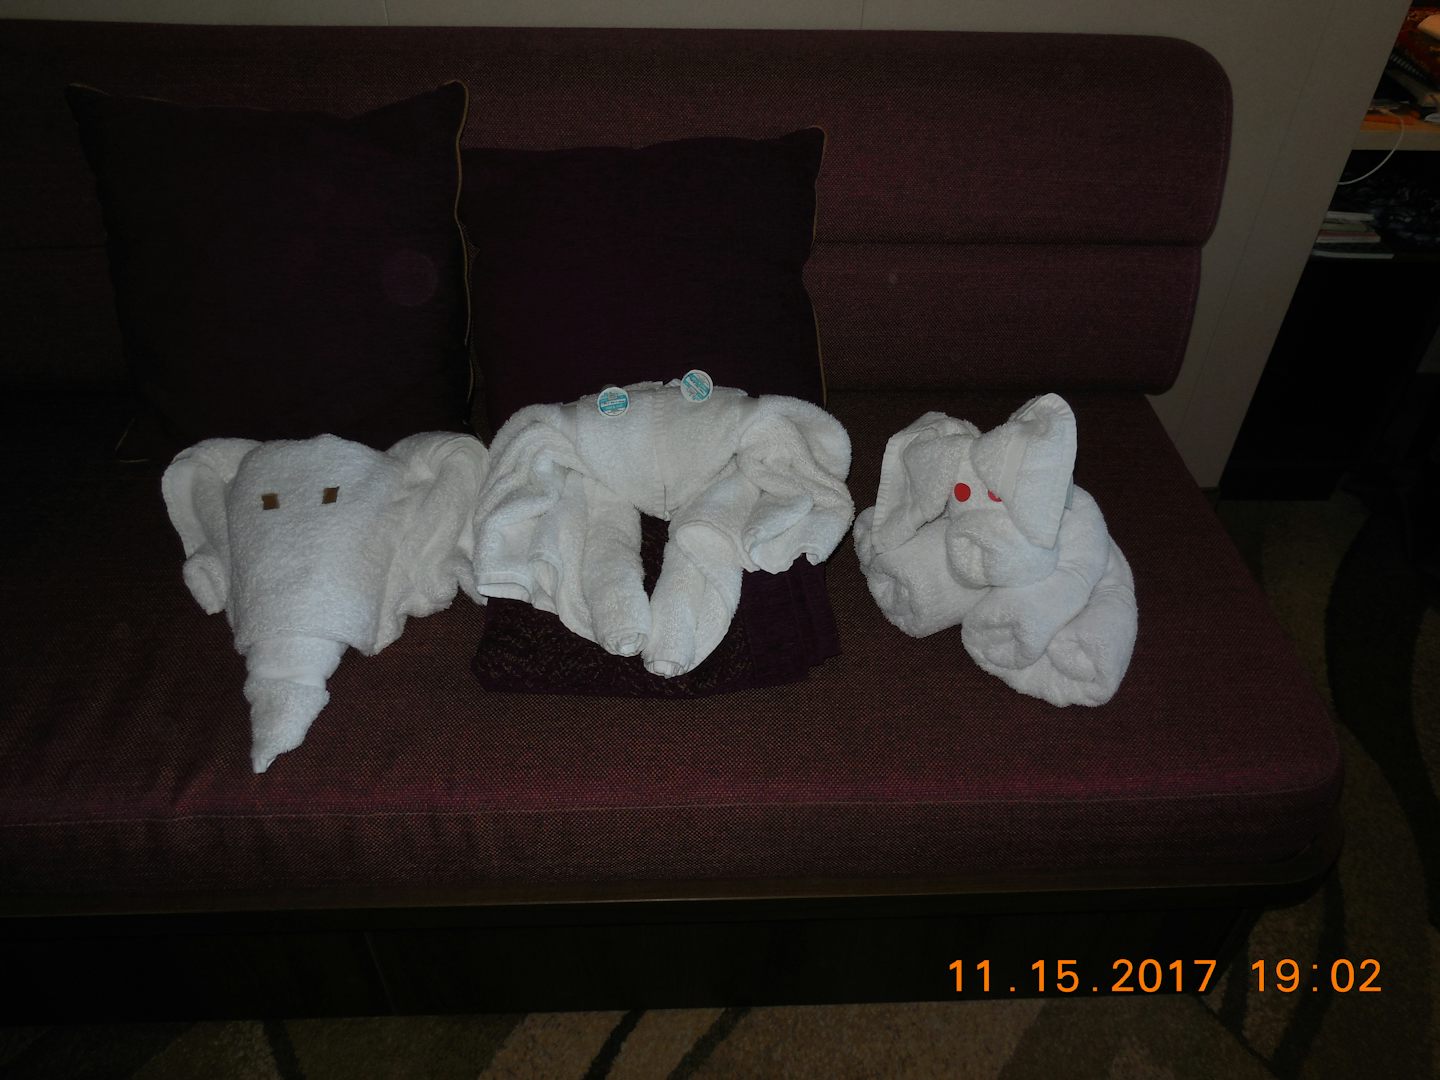 Some of my Towel Friends